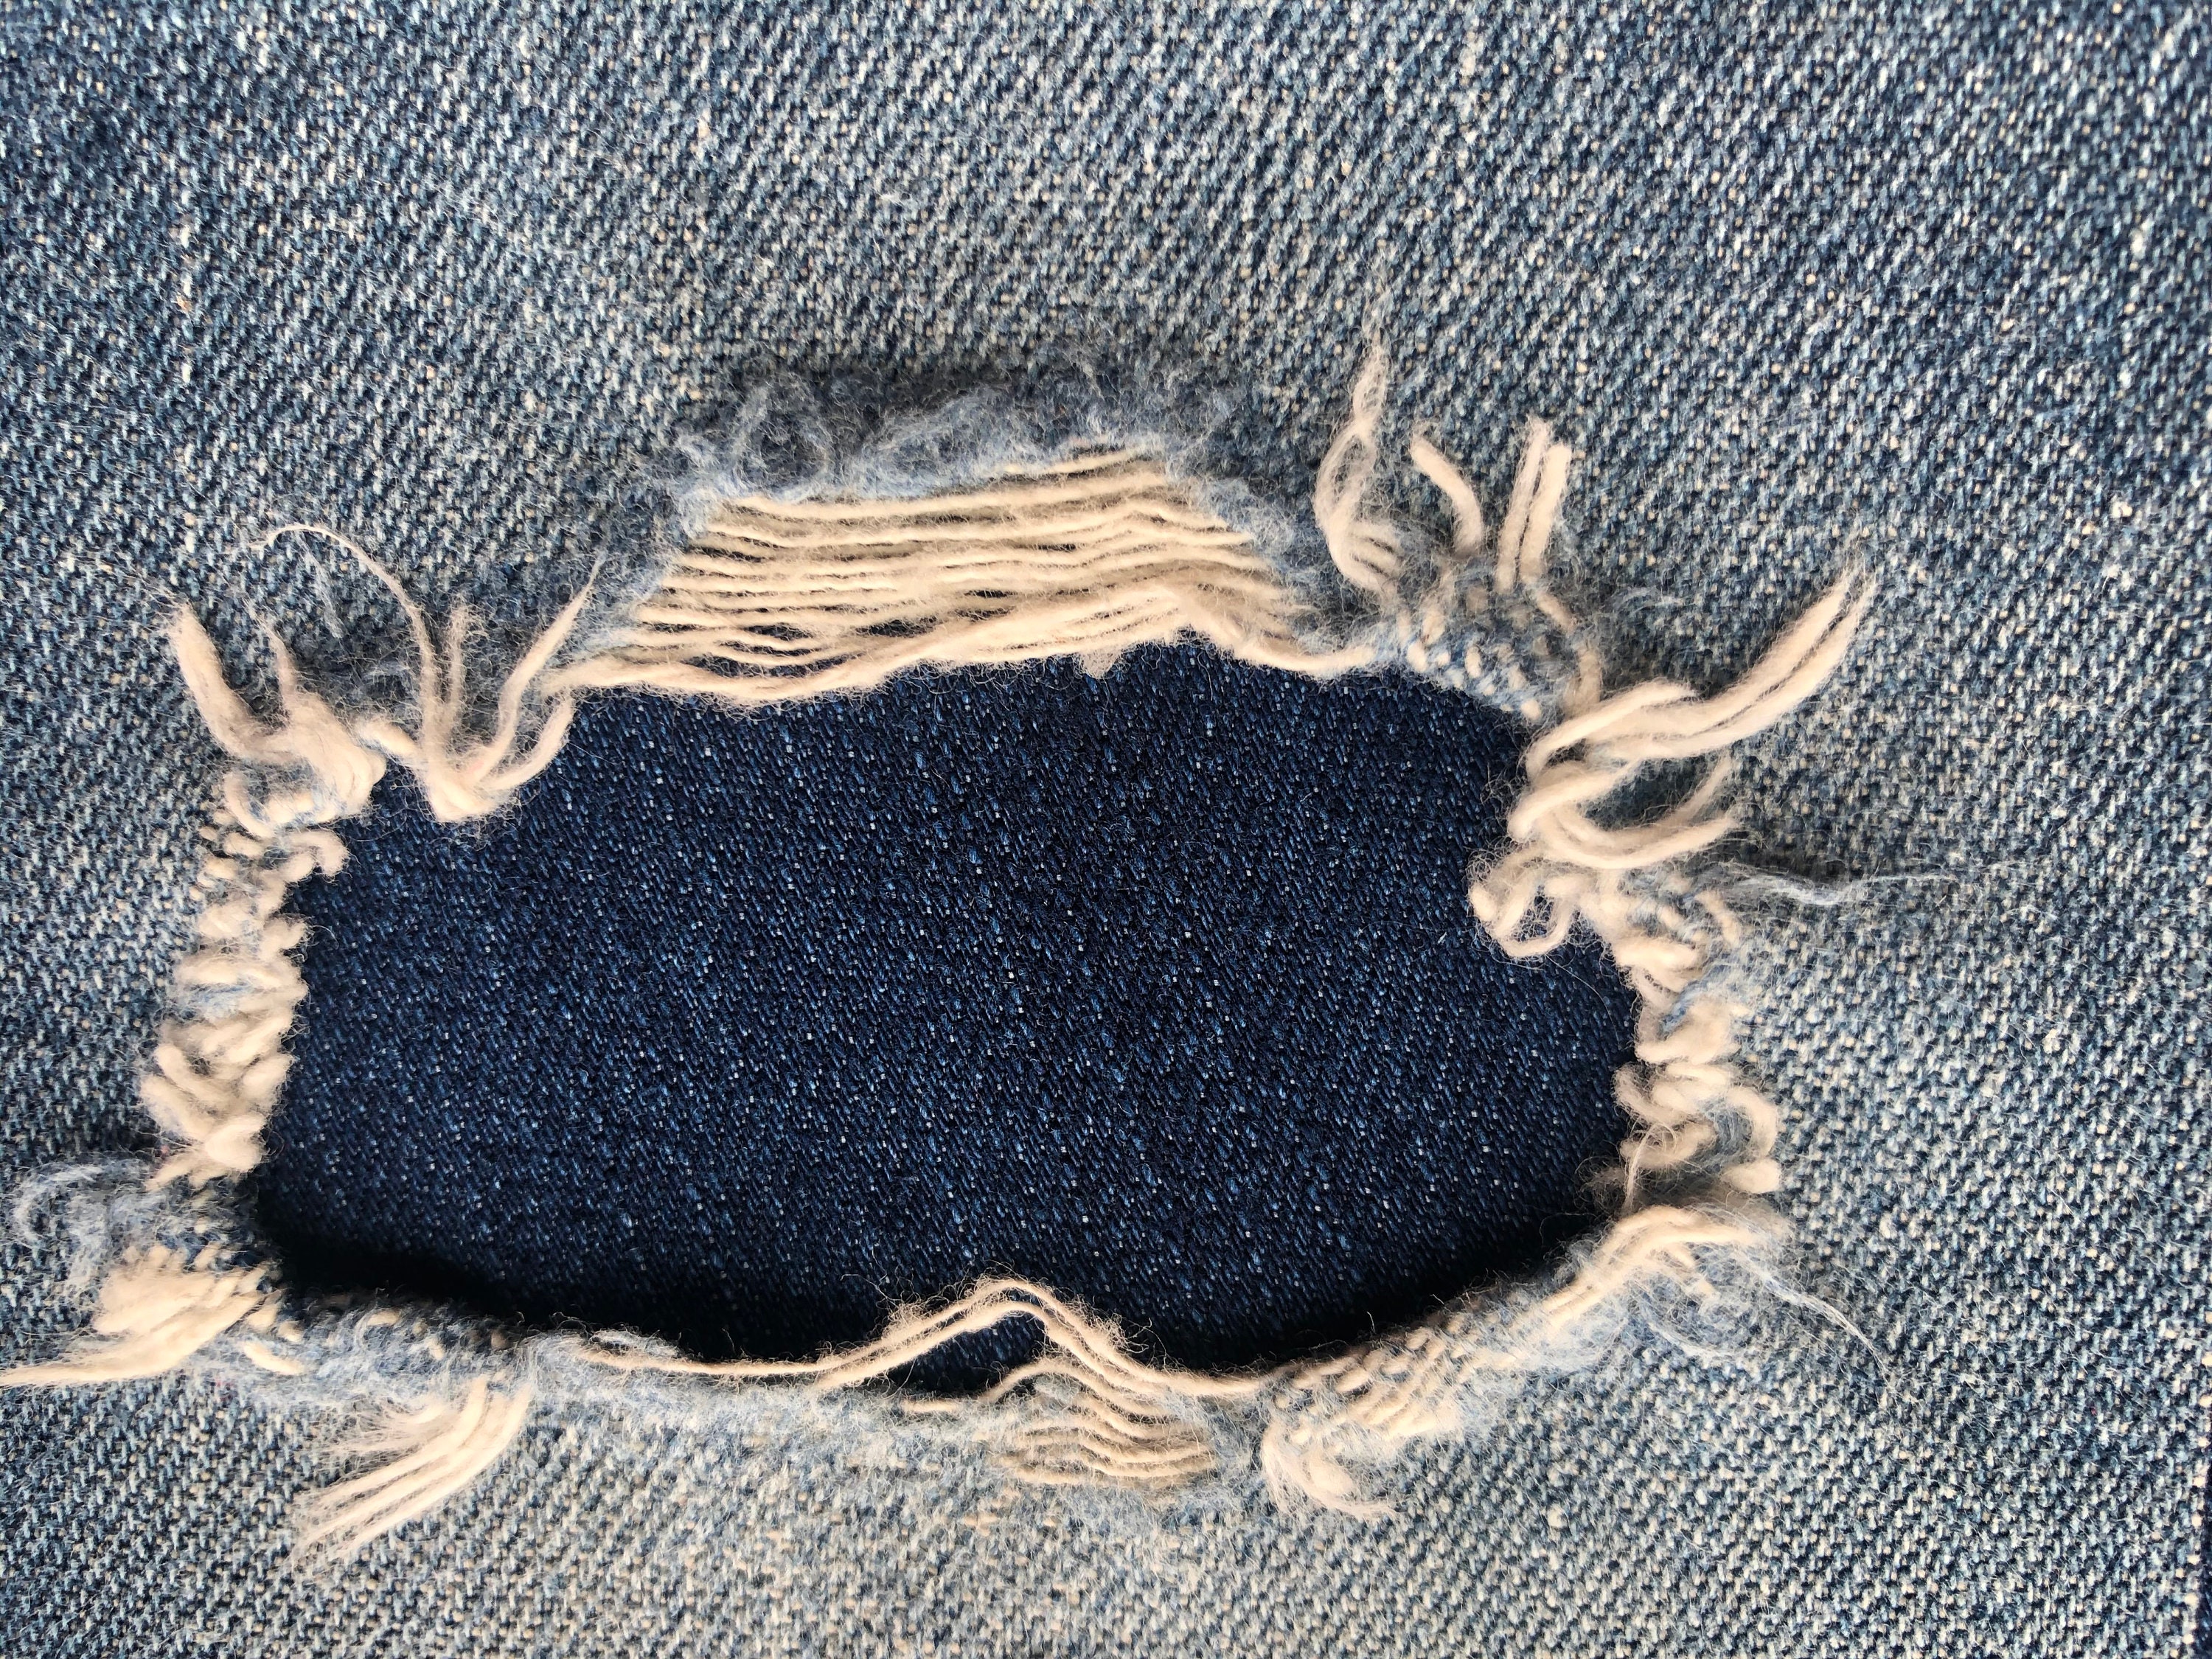  Jeans Denim Patches, 10X6Inch Denim Patches for Jeans